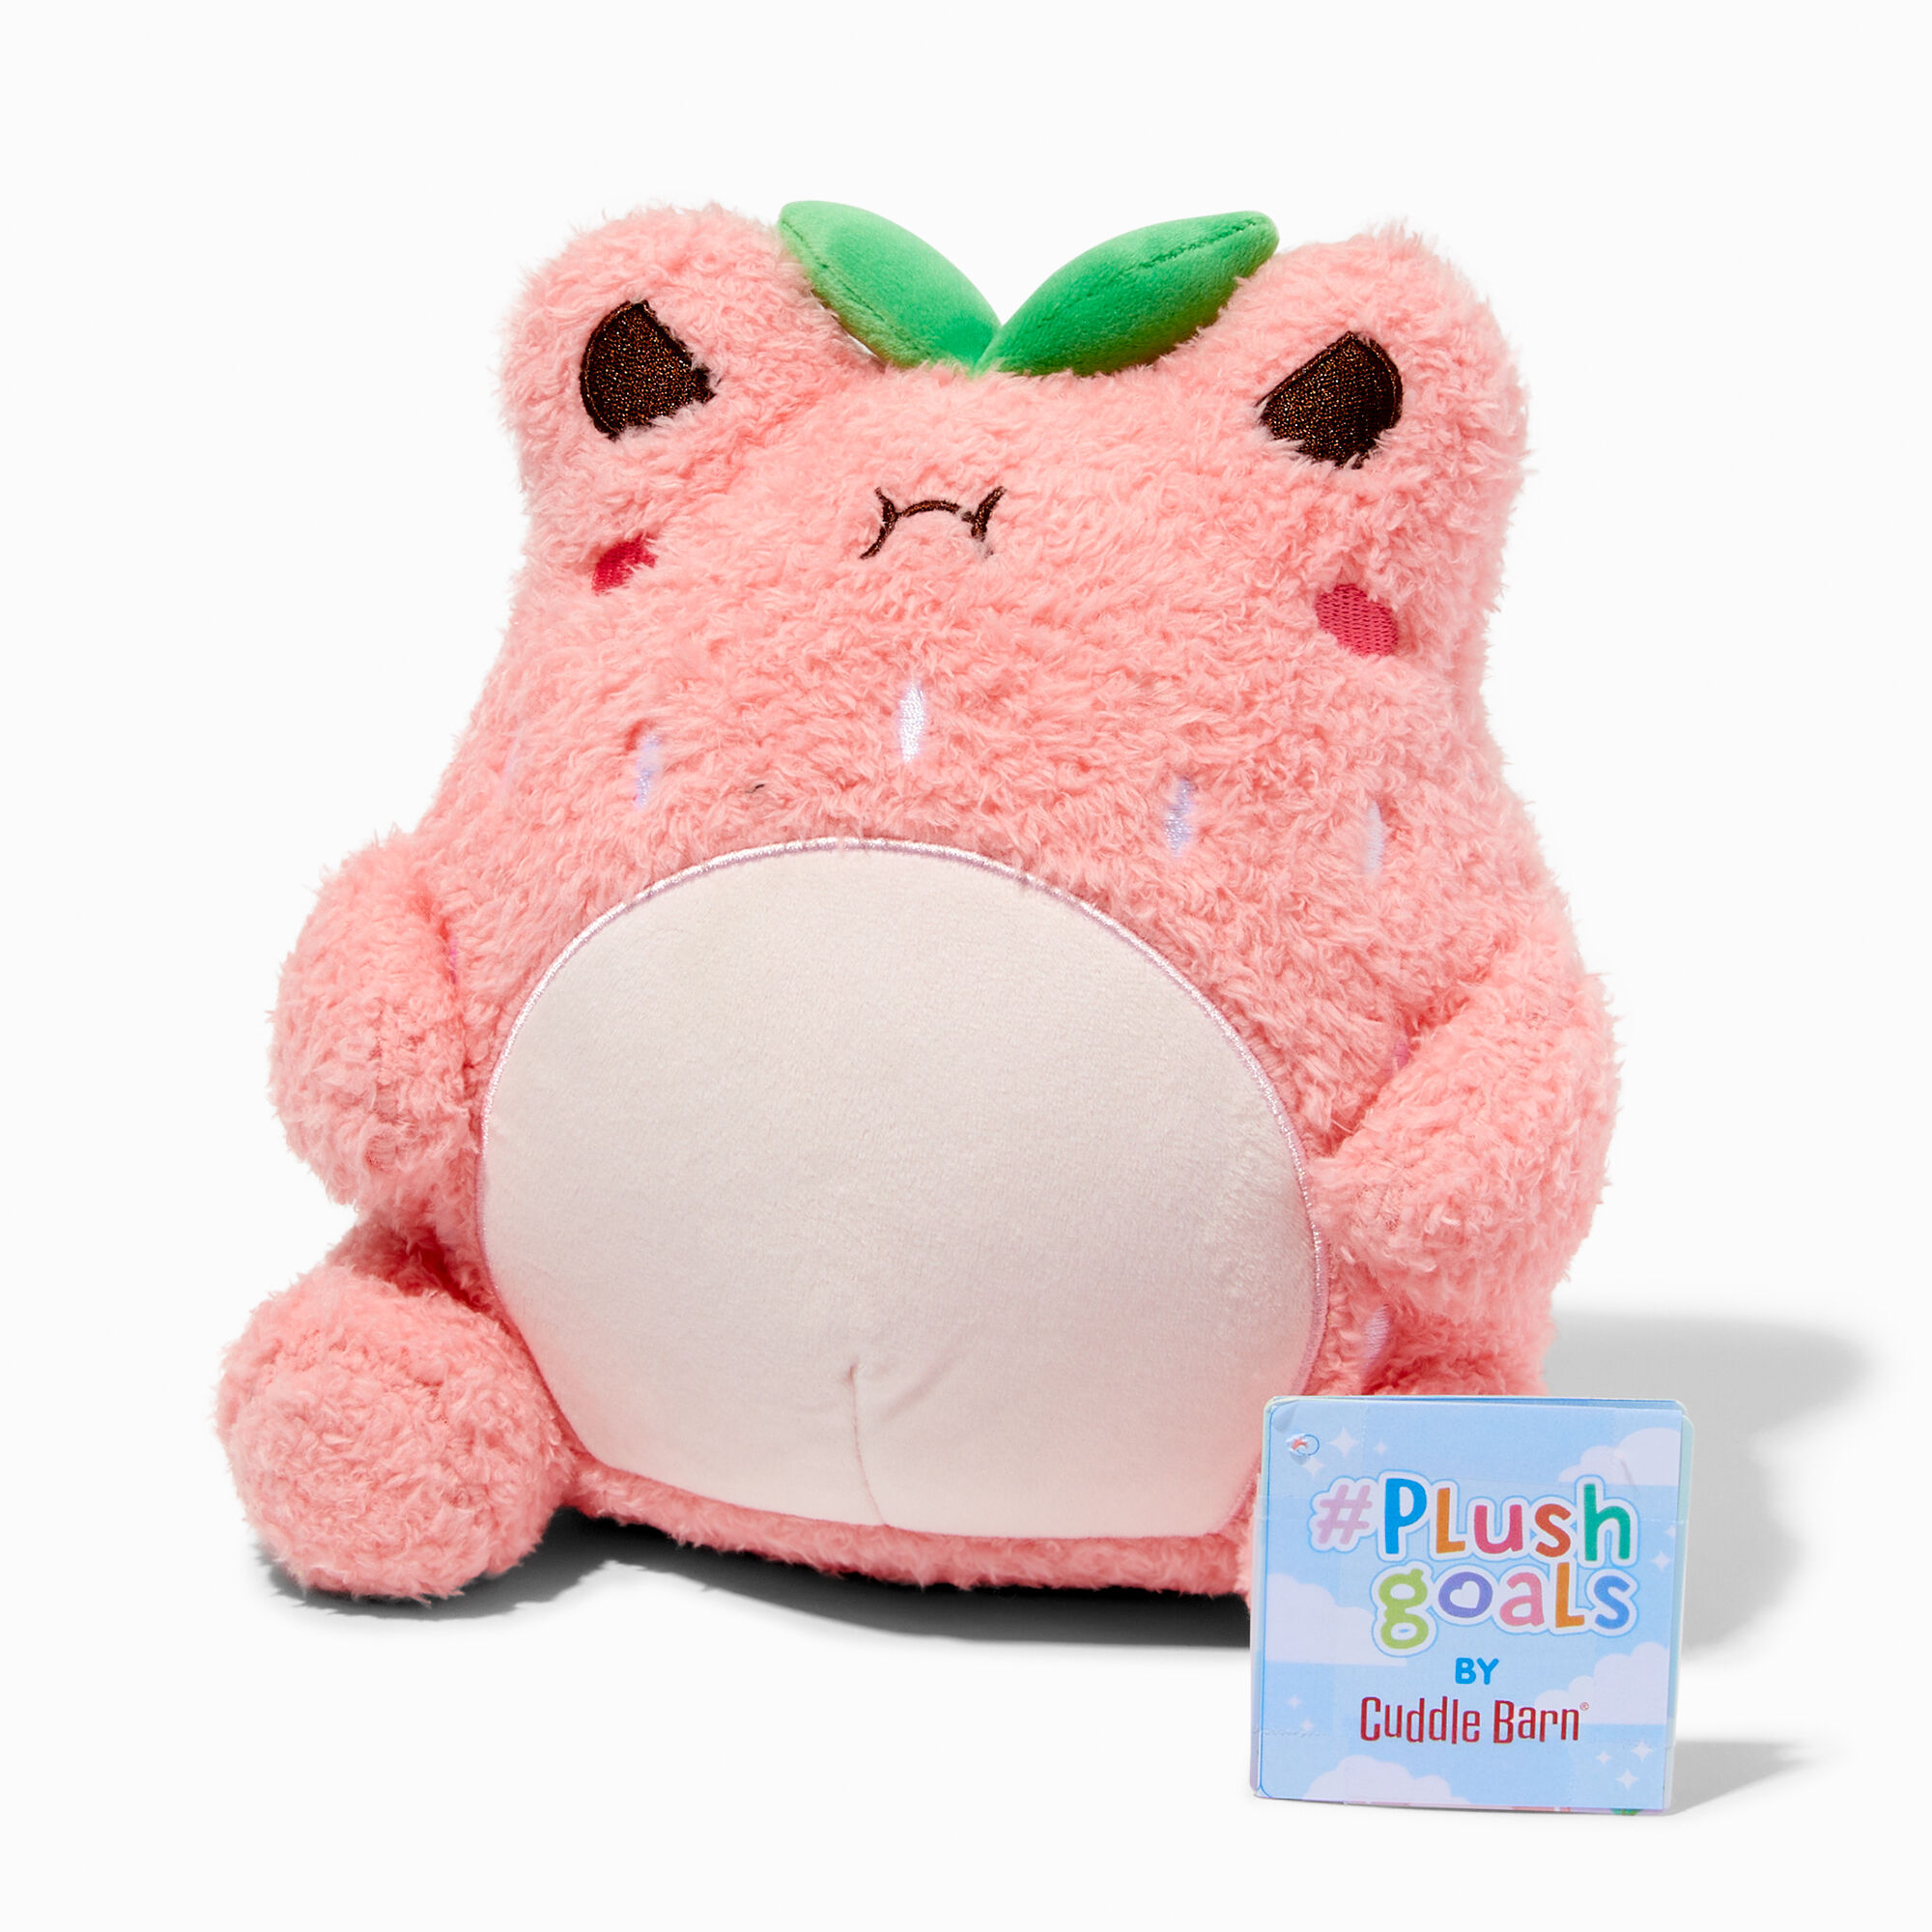 View Claires plush Goals By Cuddle Barn 9 Strawberry Wawa Plush Toy information